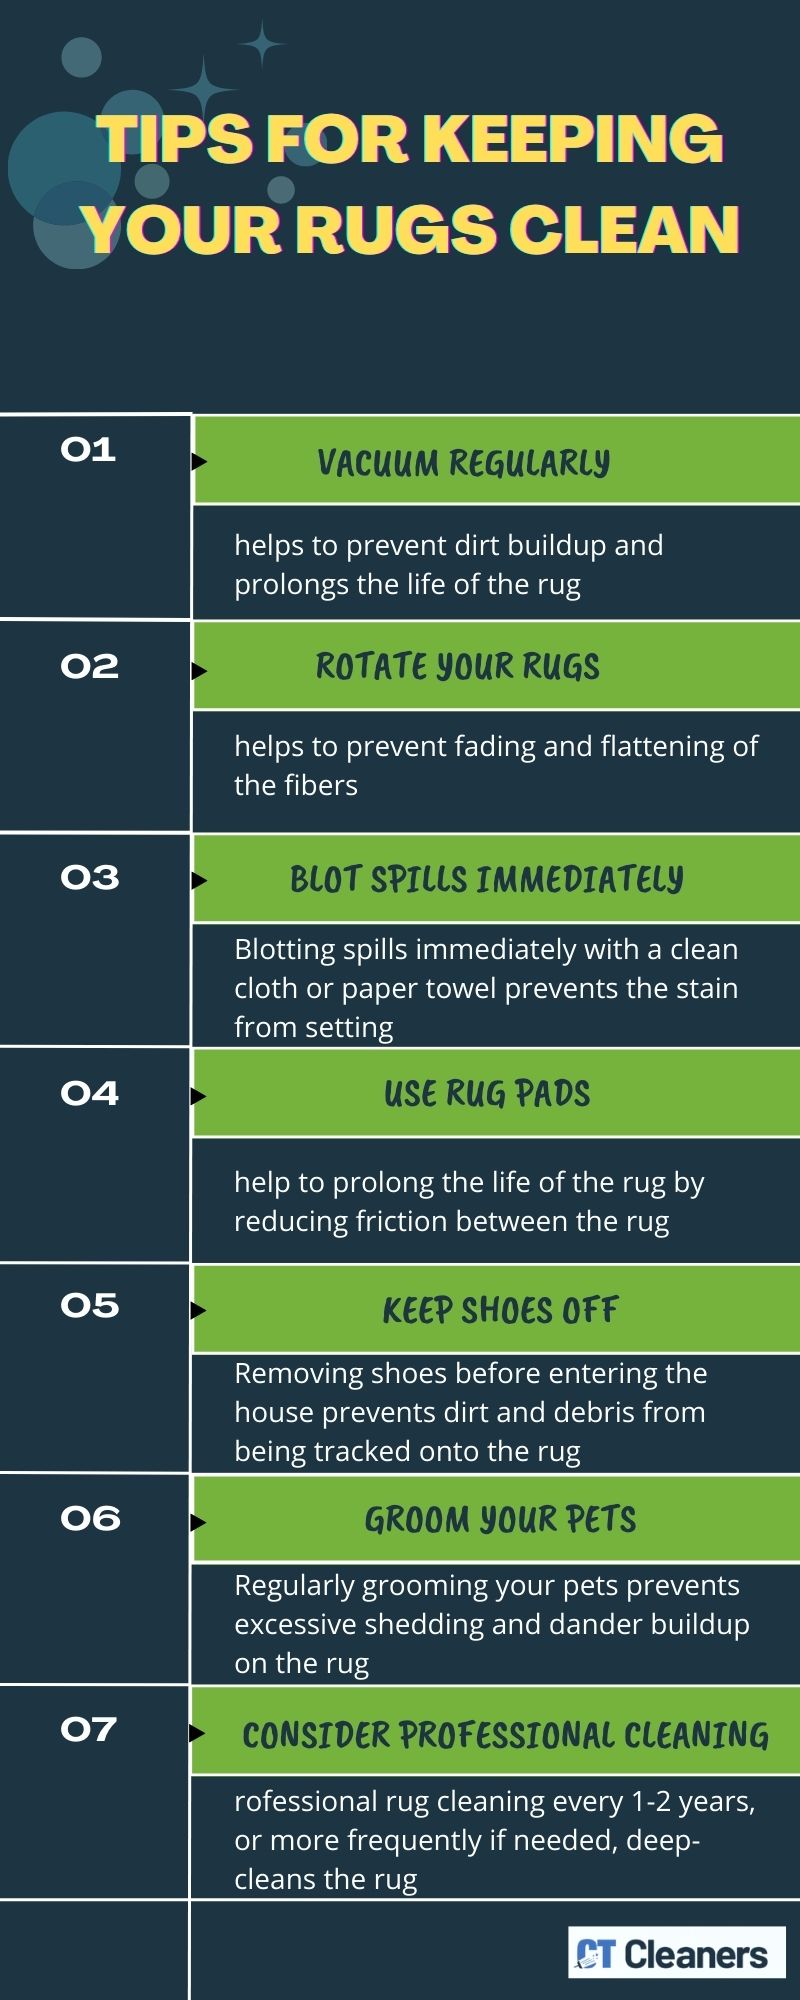 Tips for Keeping Your Rugs Clean